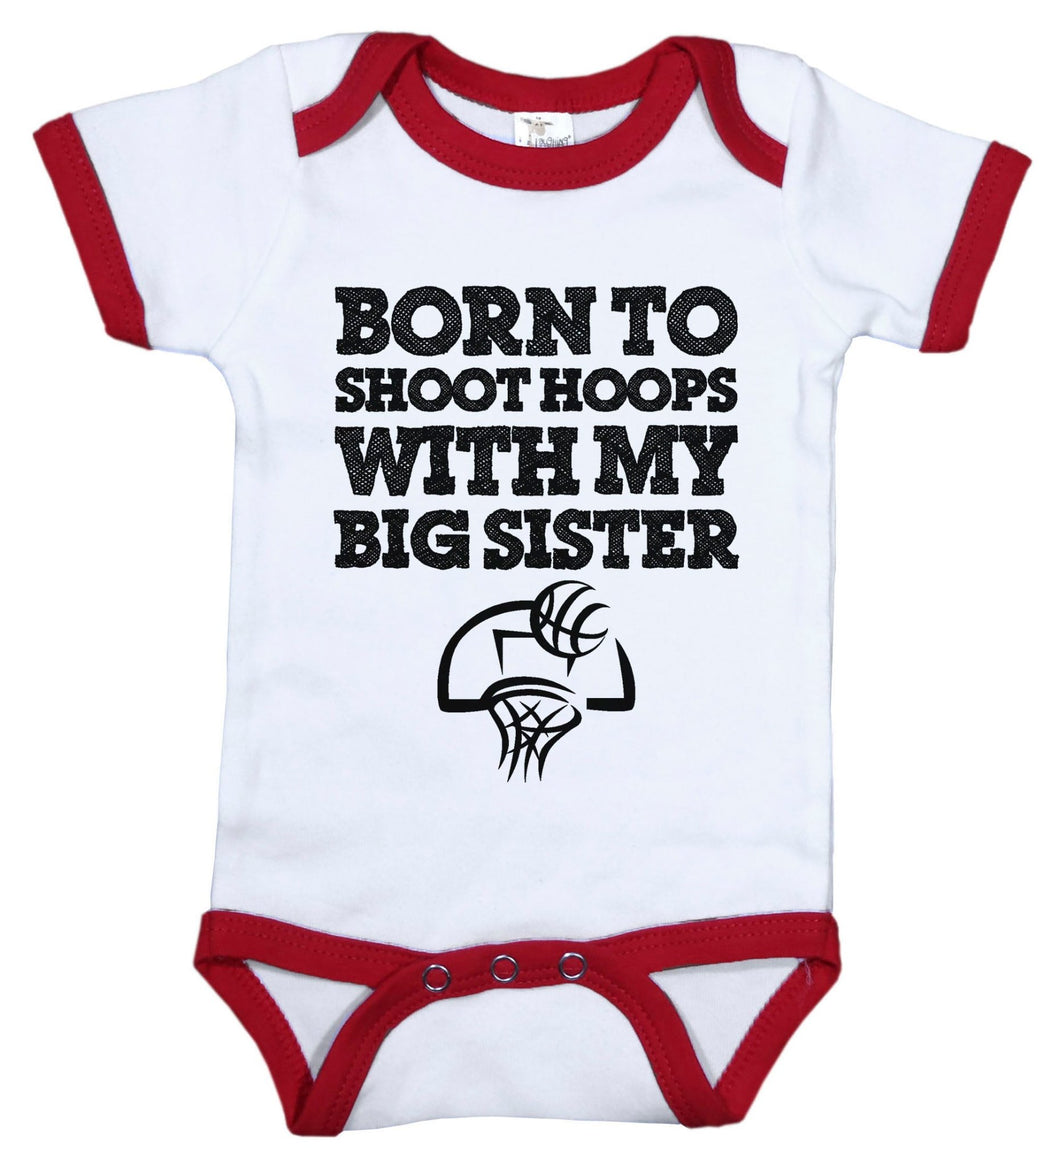 Born To Shoot Hoops With My Big Sister / Basketball Ringer Onesie - Baffle